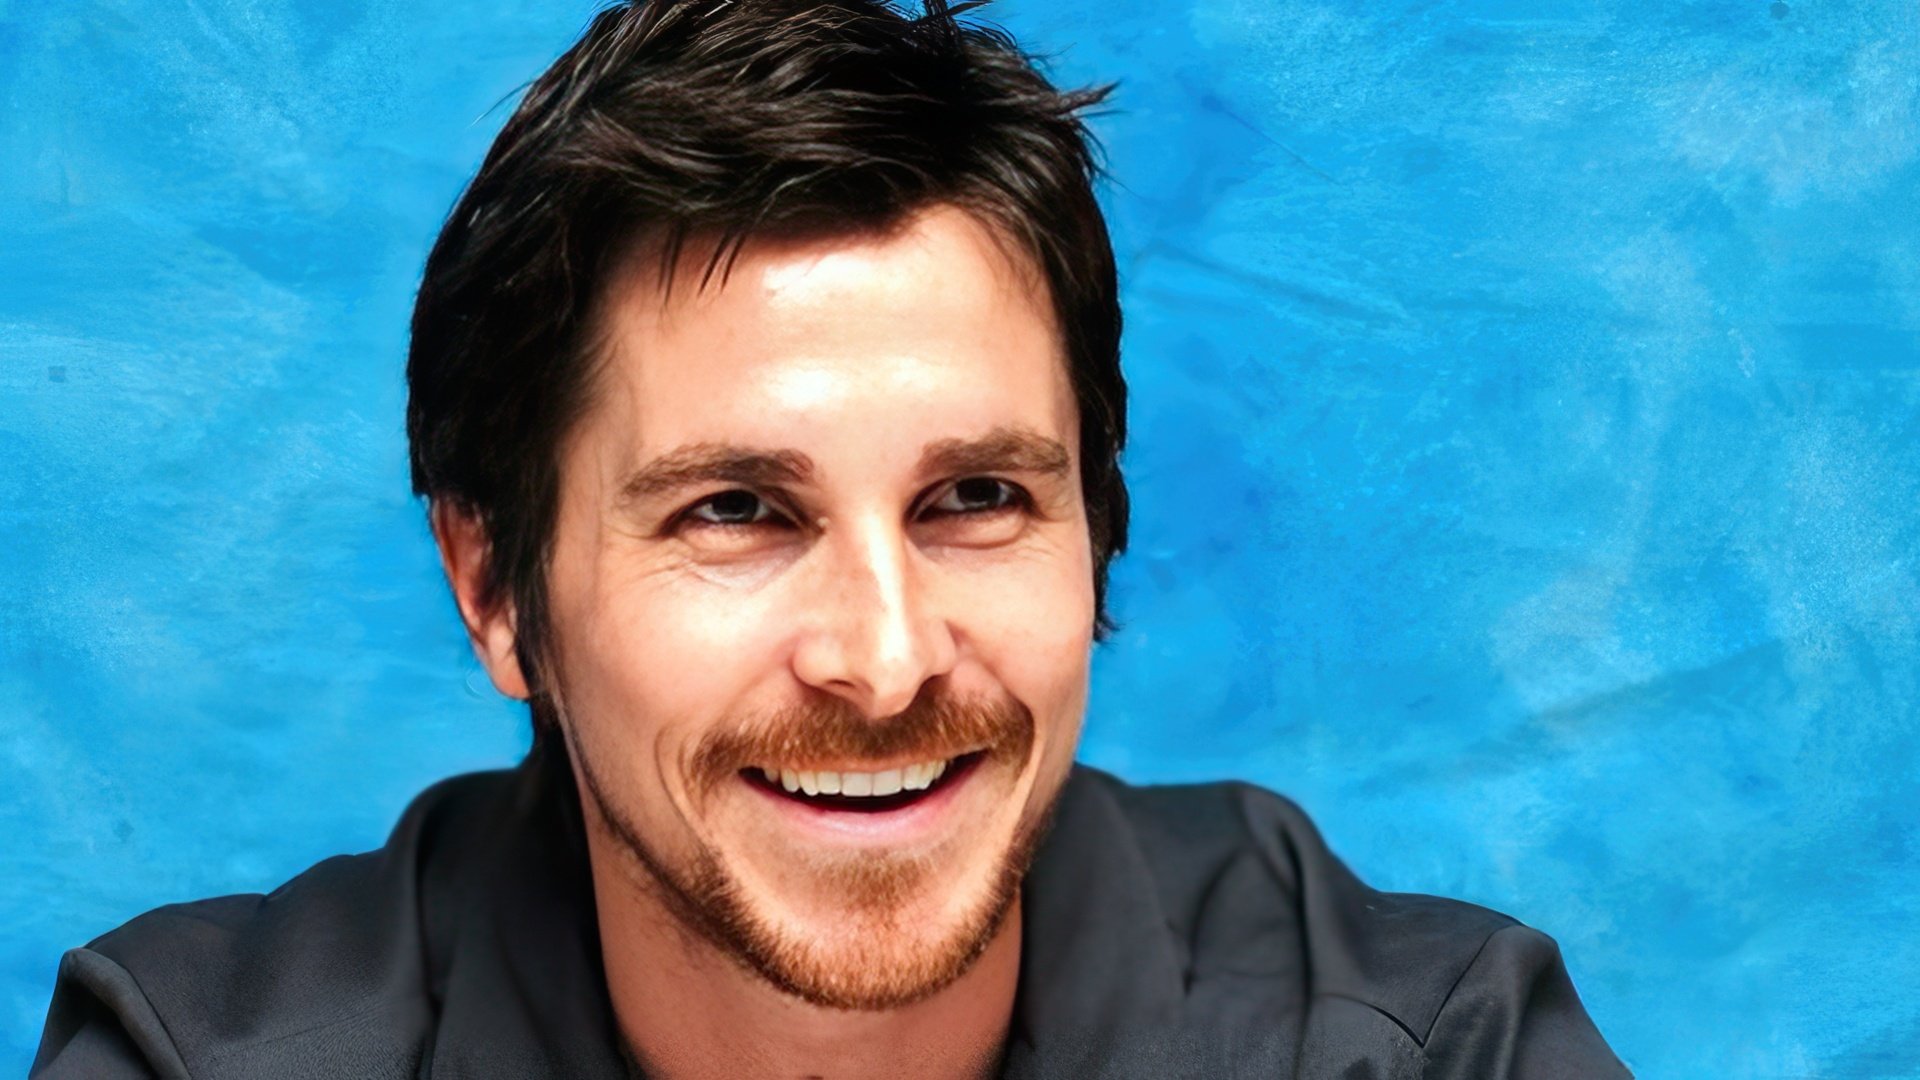 In the Picture: Christian Bale